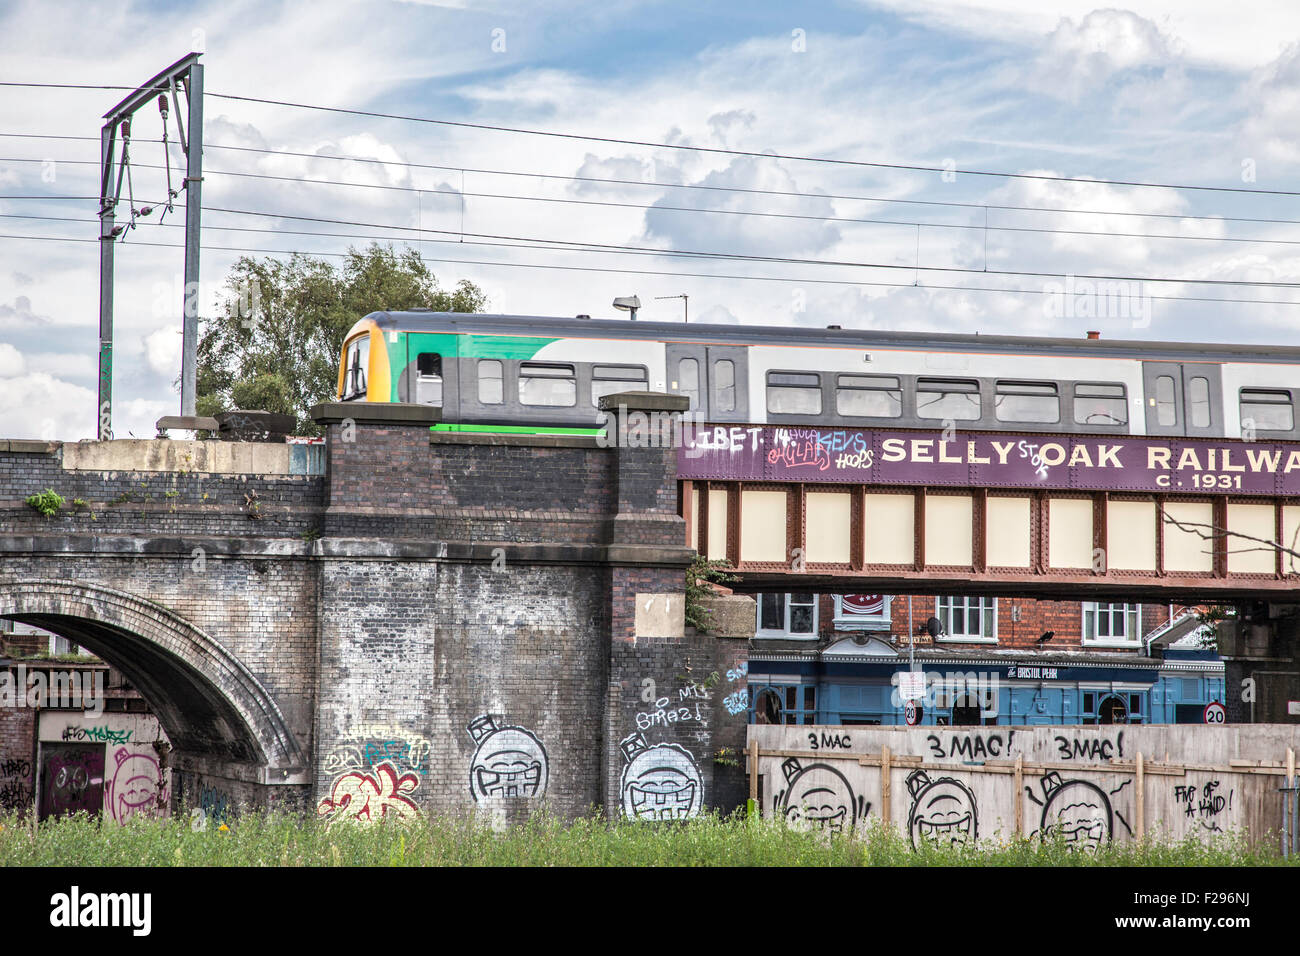 A London Midland train crossing the graffitied railway arches at Selly Oak, Birmingham, England, UK Stock Photo